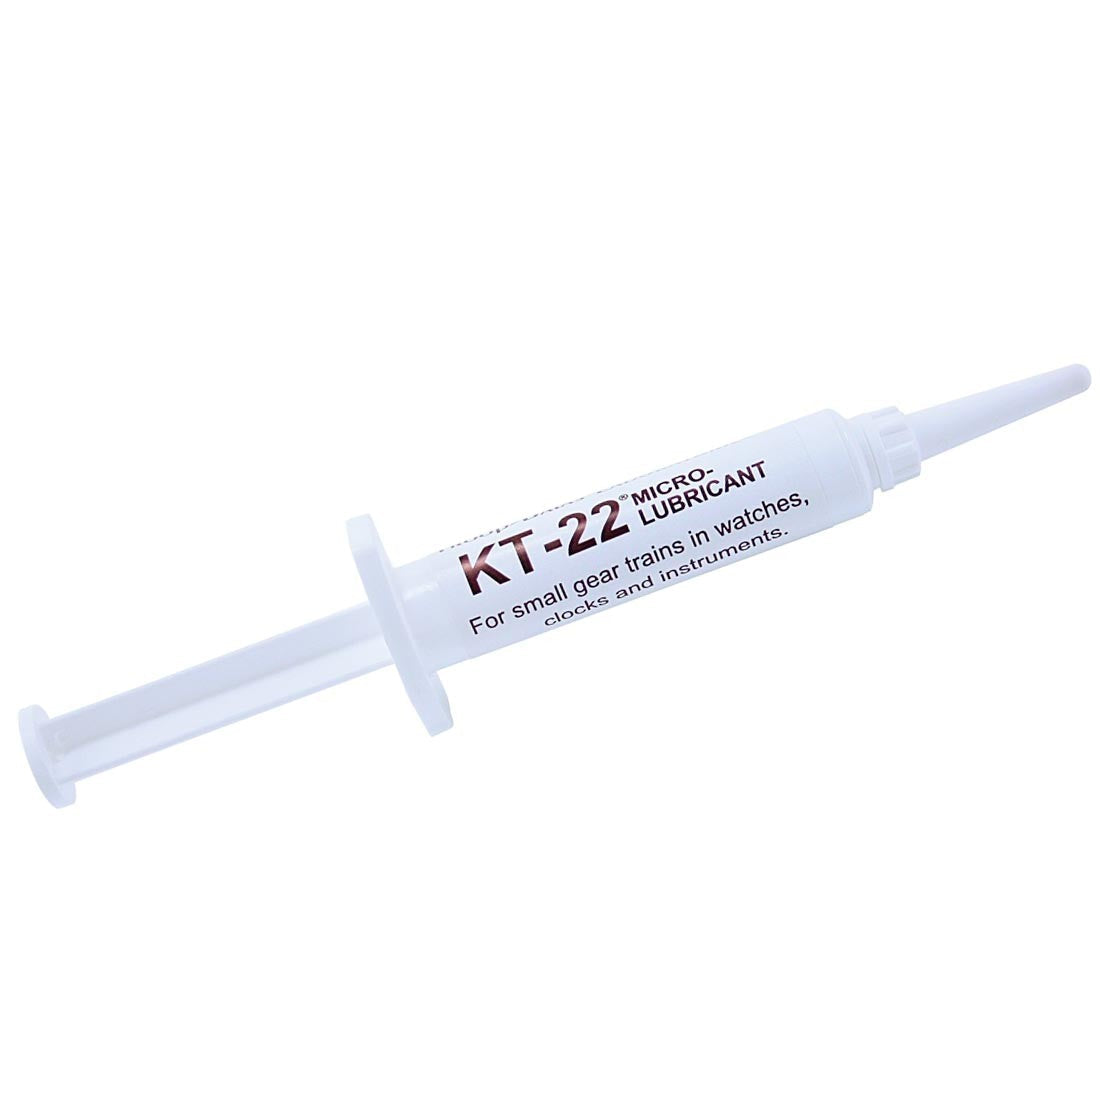 KT-22 Microlubricant Grease with Moisture Sealer